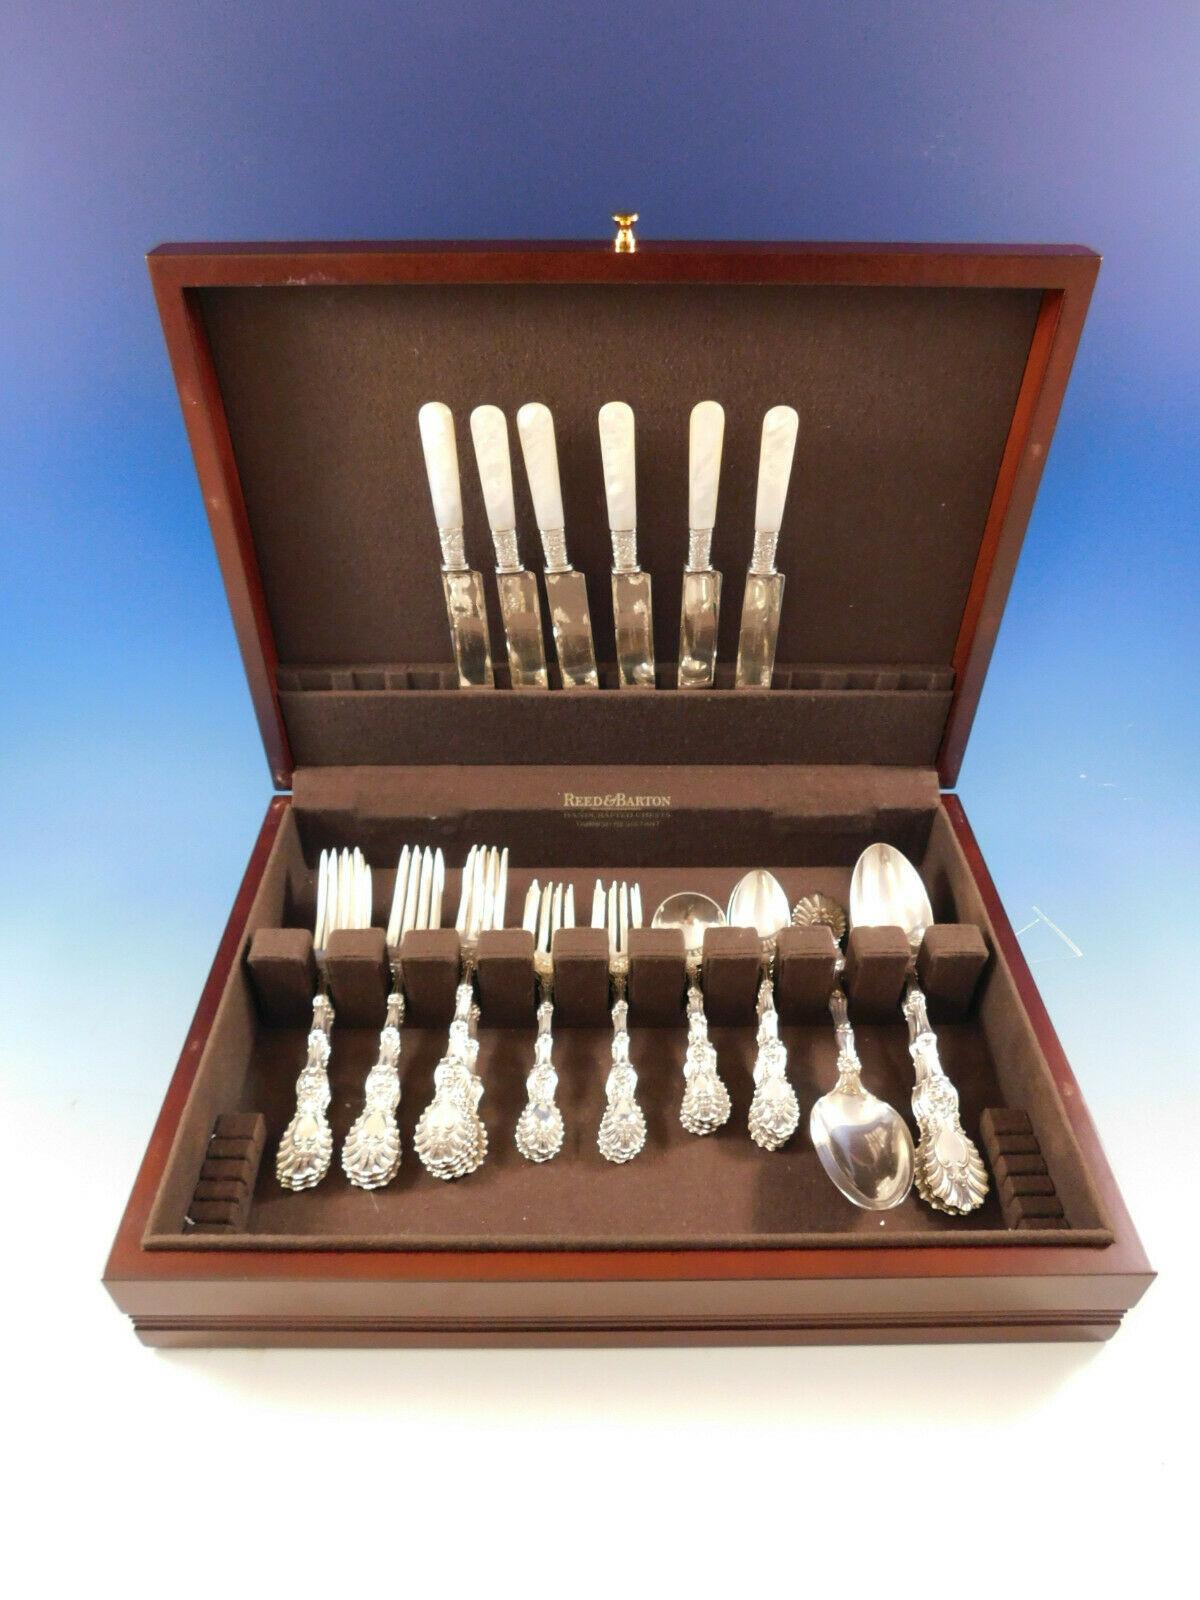 Gorgeous Radiant by Whiting sterling silver flatware set of 42 pieces. Great starter set! This set includes:

6 knives with mother of pearl handles with floral sterling band and plated blunt blades, 8 1/2